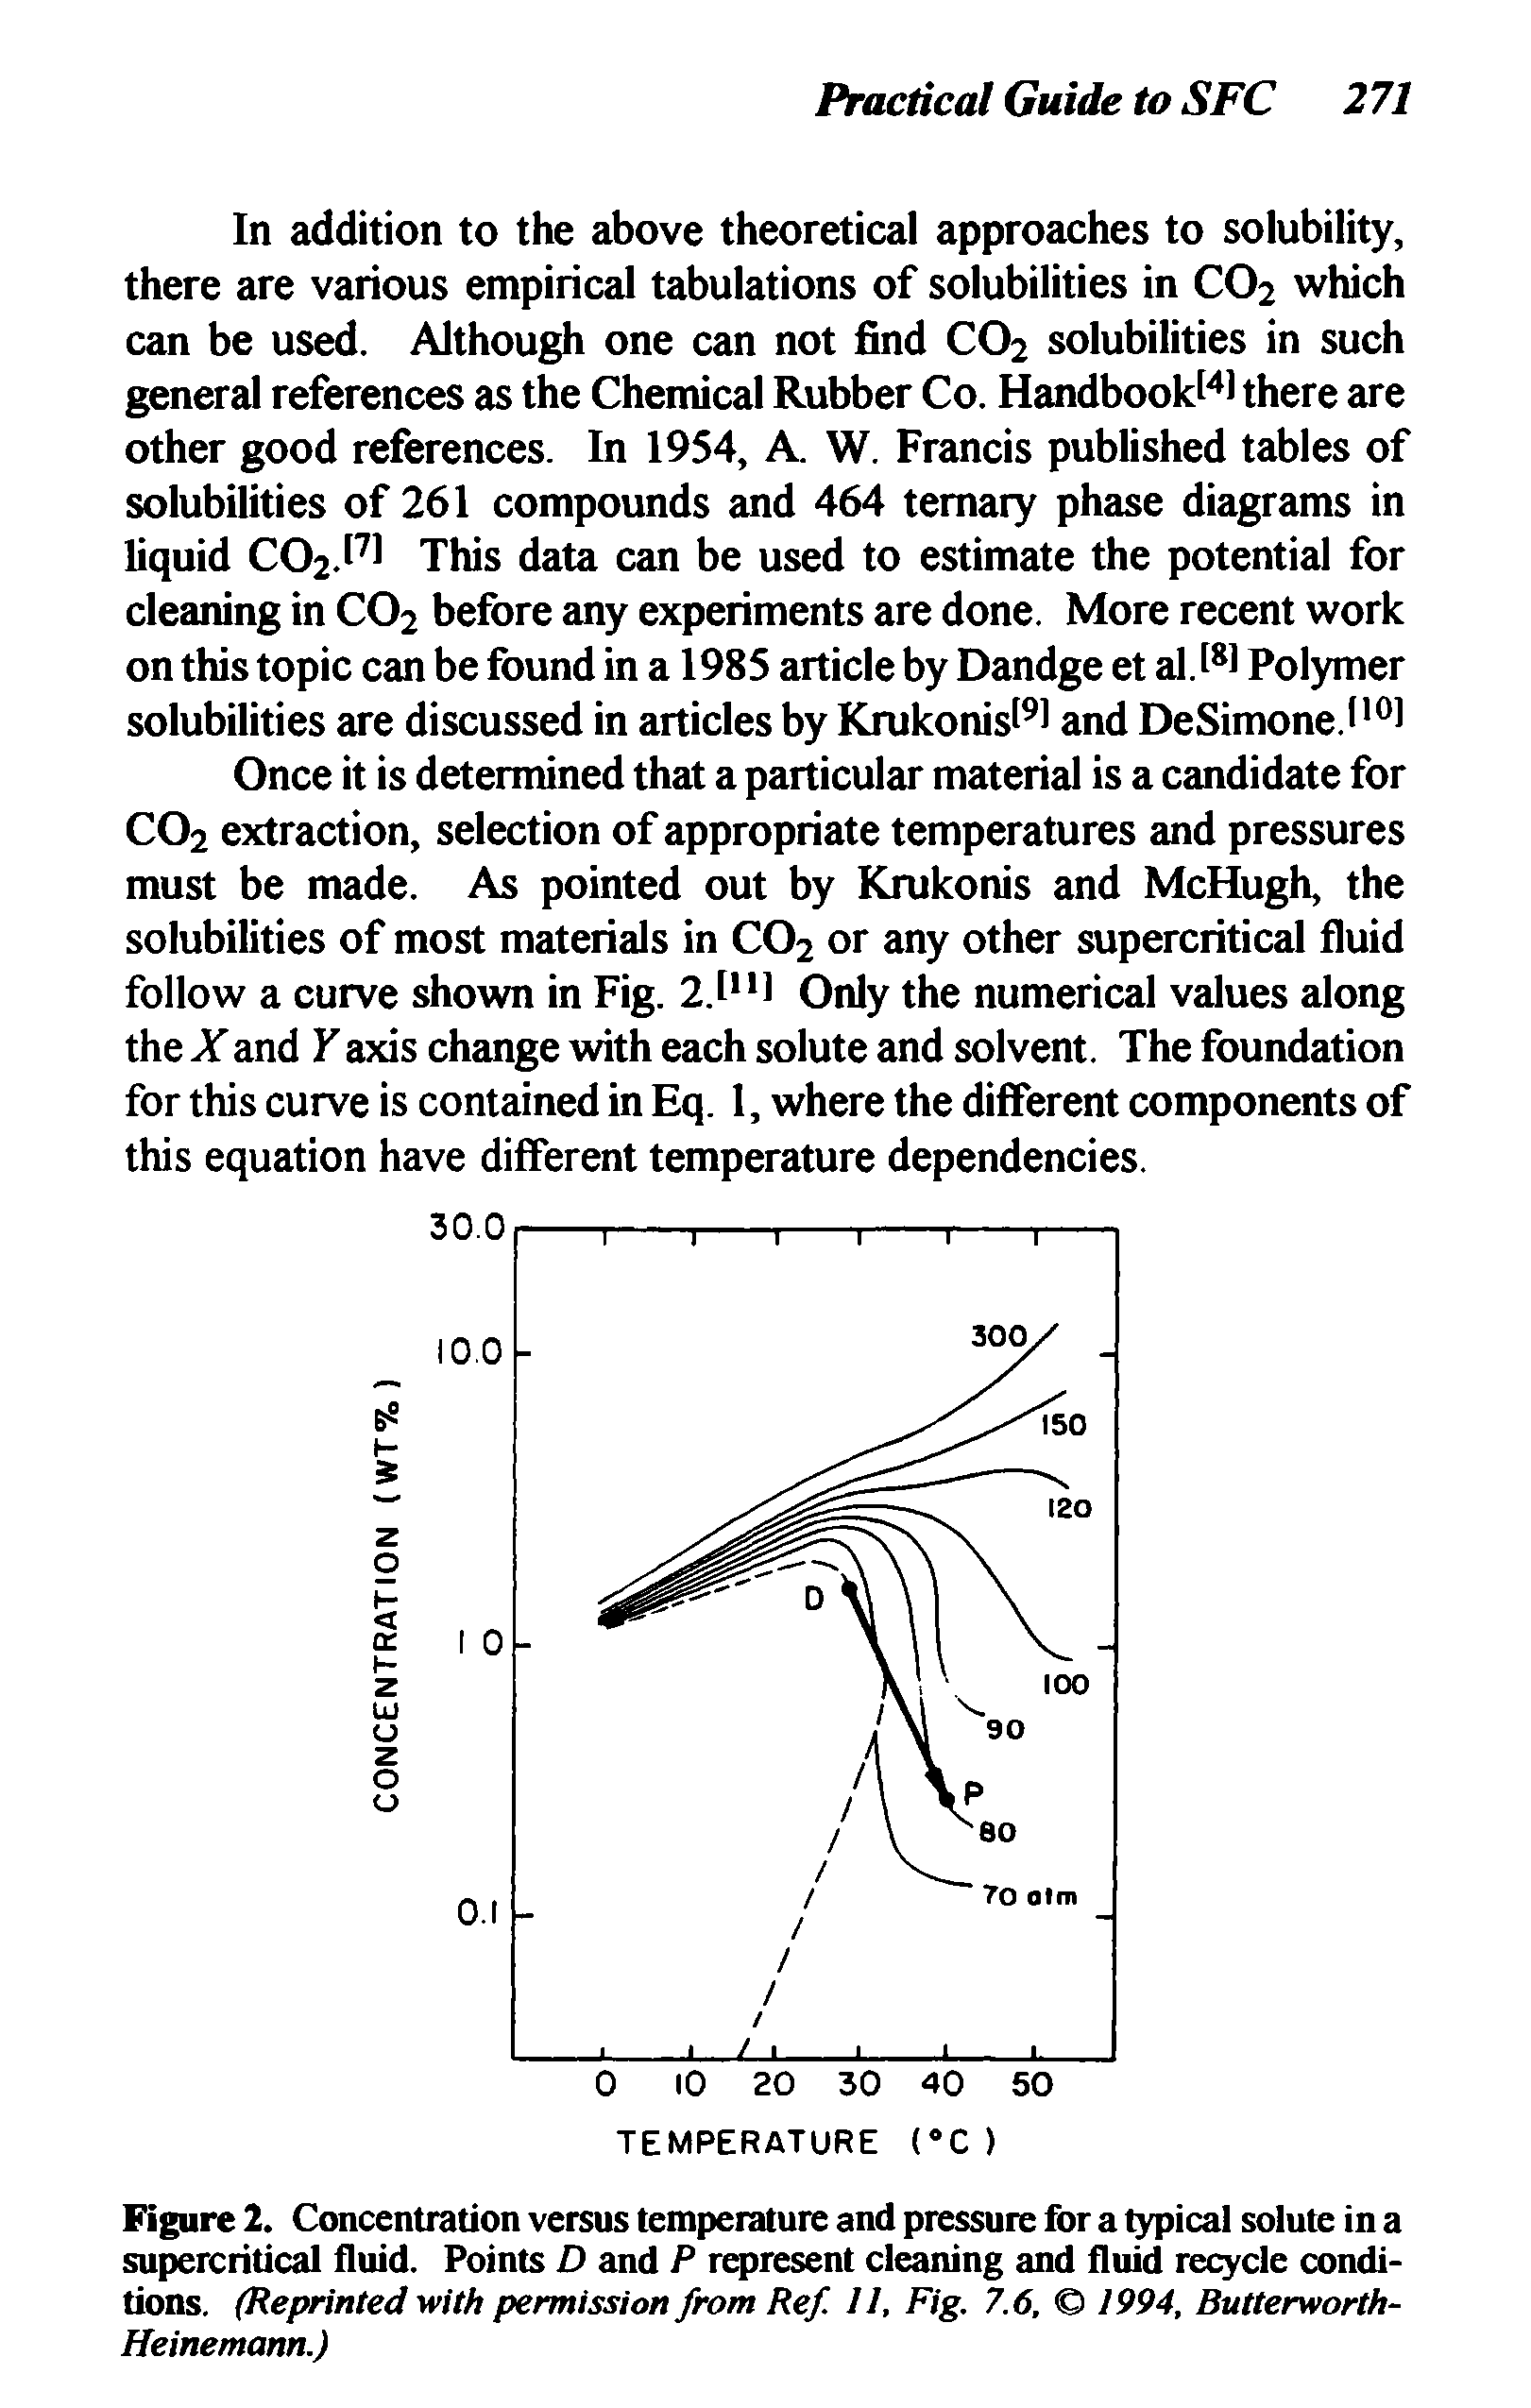 Figure 2. Concentration versus temperature and pressure for a typical solute in a supercritical fluid. Points D and P represent cleaning and fluid recycle conditions. (Reprinted with permission from Ref. 11, Fig. 7.6, 1994, Butterworth-Heinemann.)...